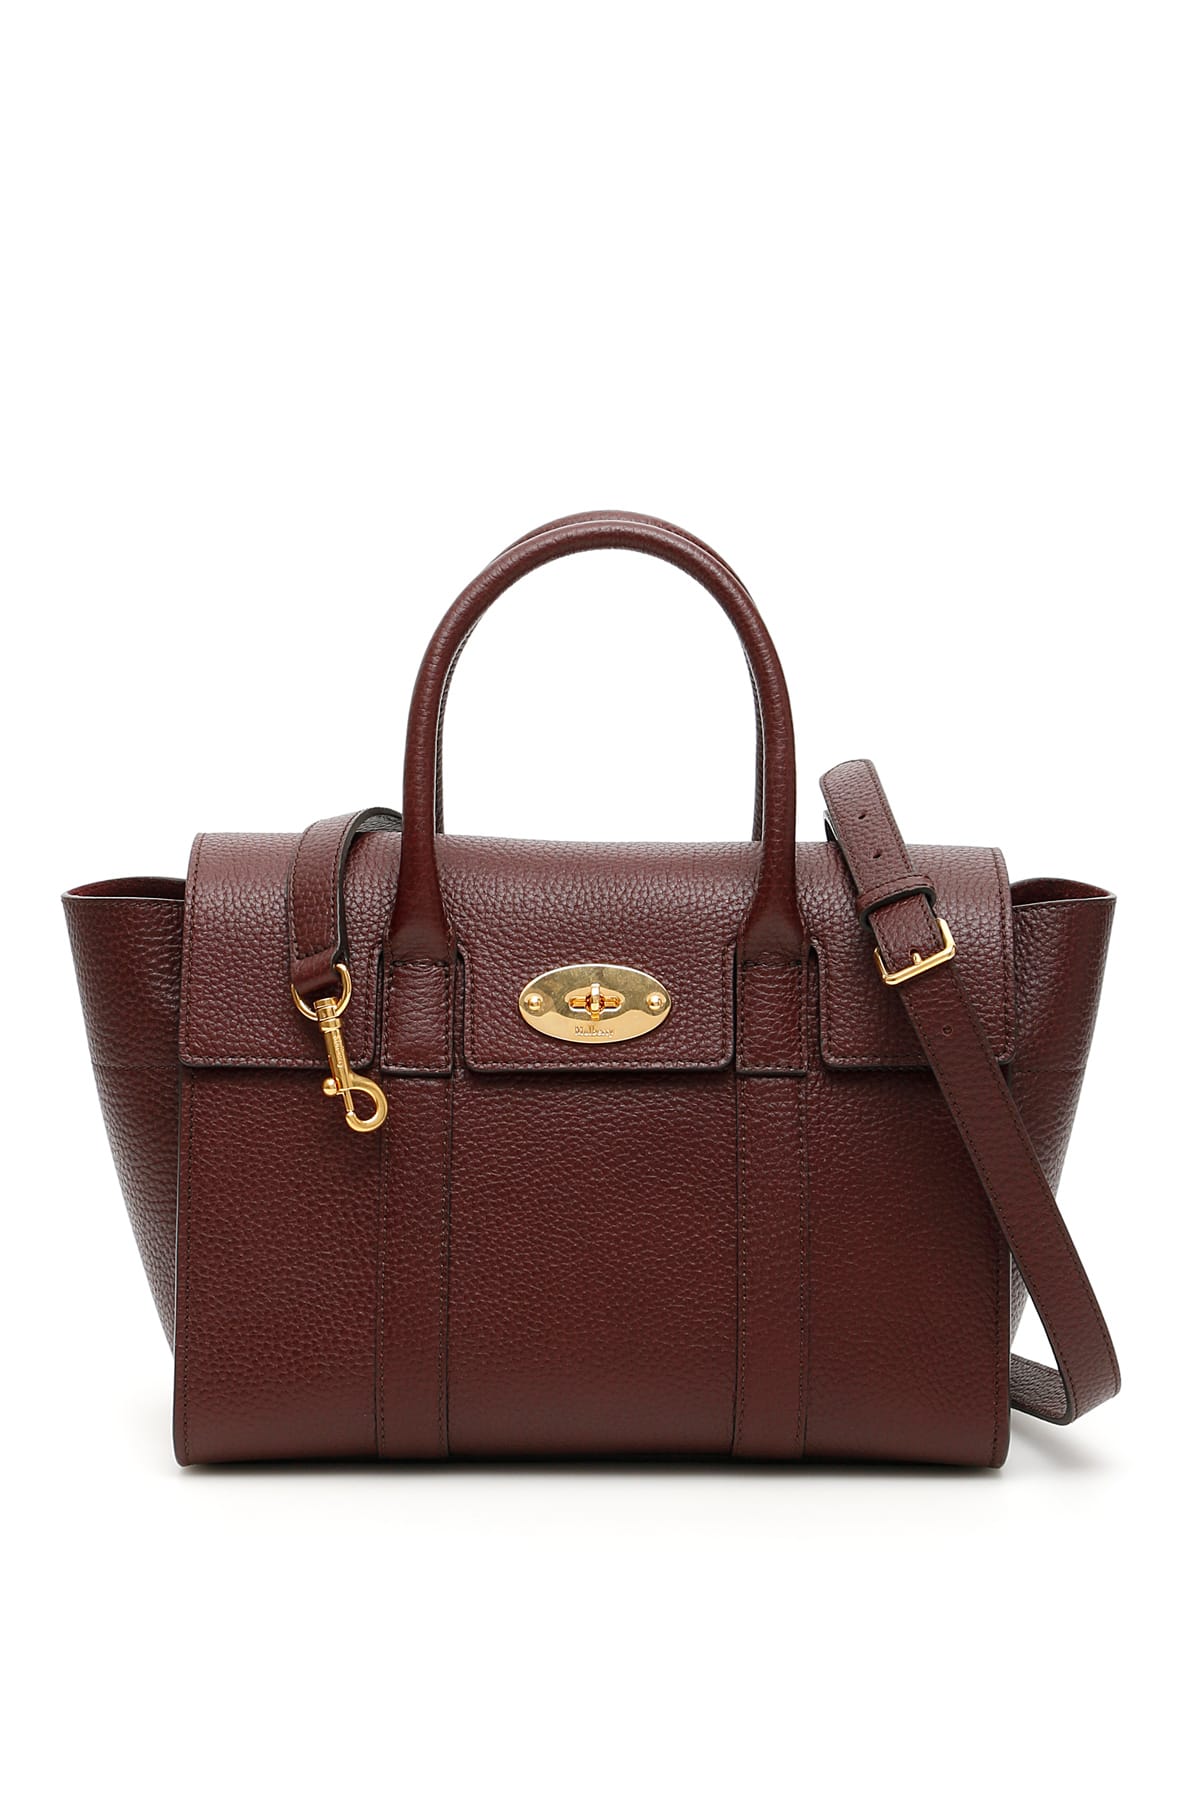 Mulberry Mulberry Small Bayswater Bag - OXBLOOD (Brown) - 10964073 ...